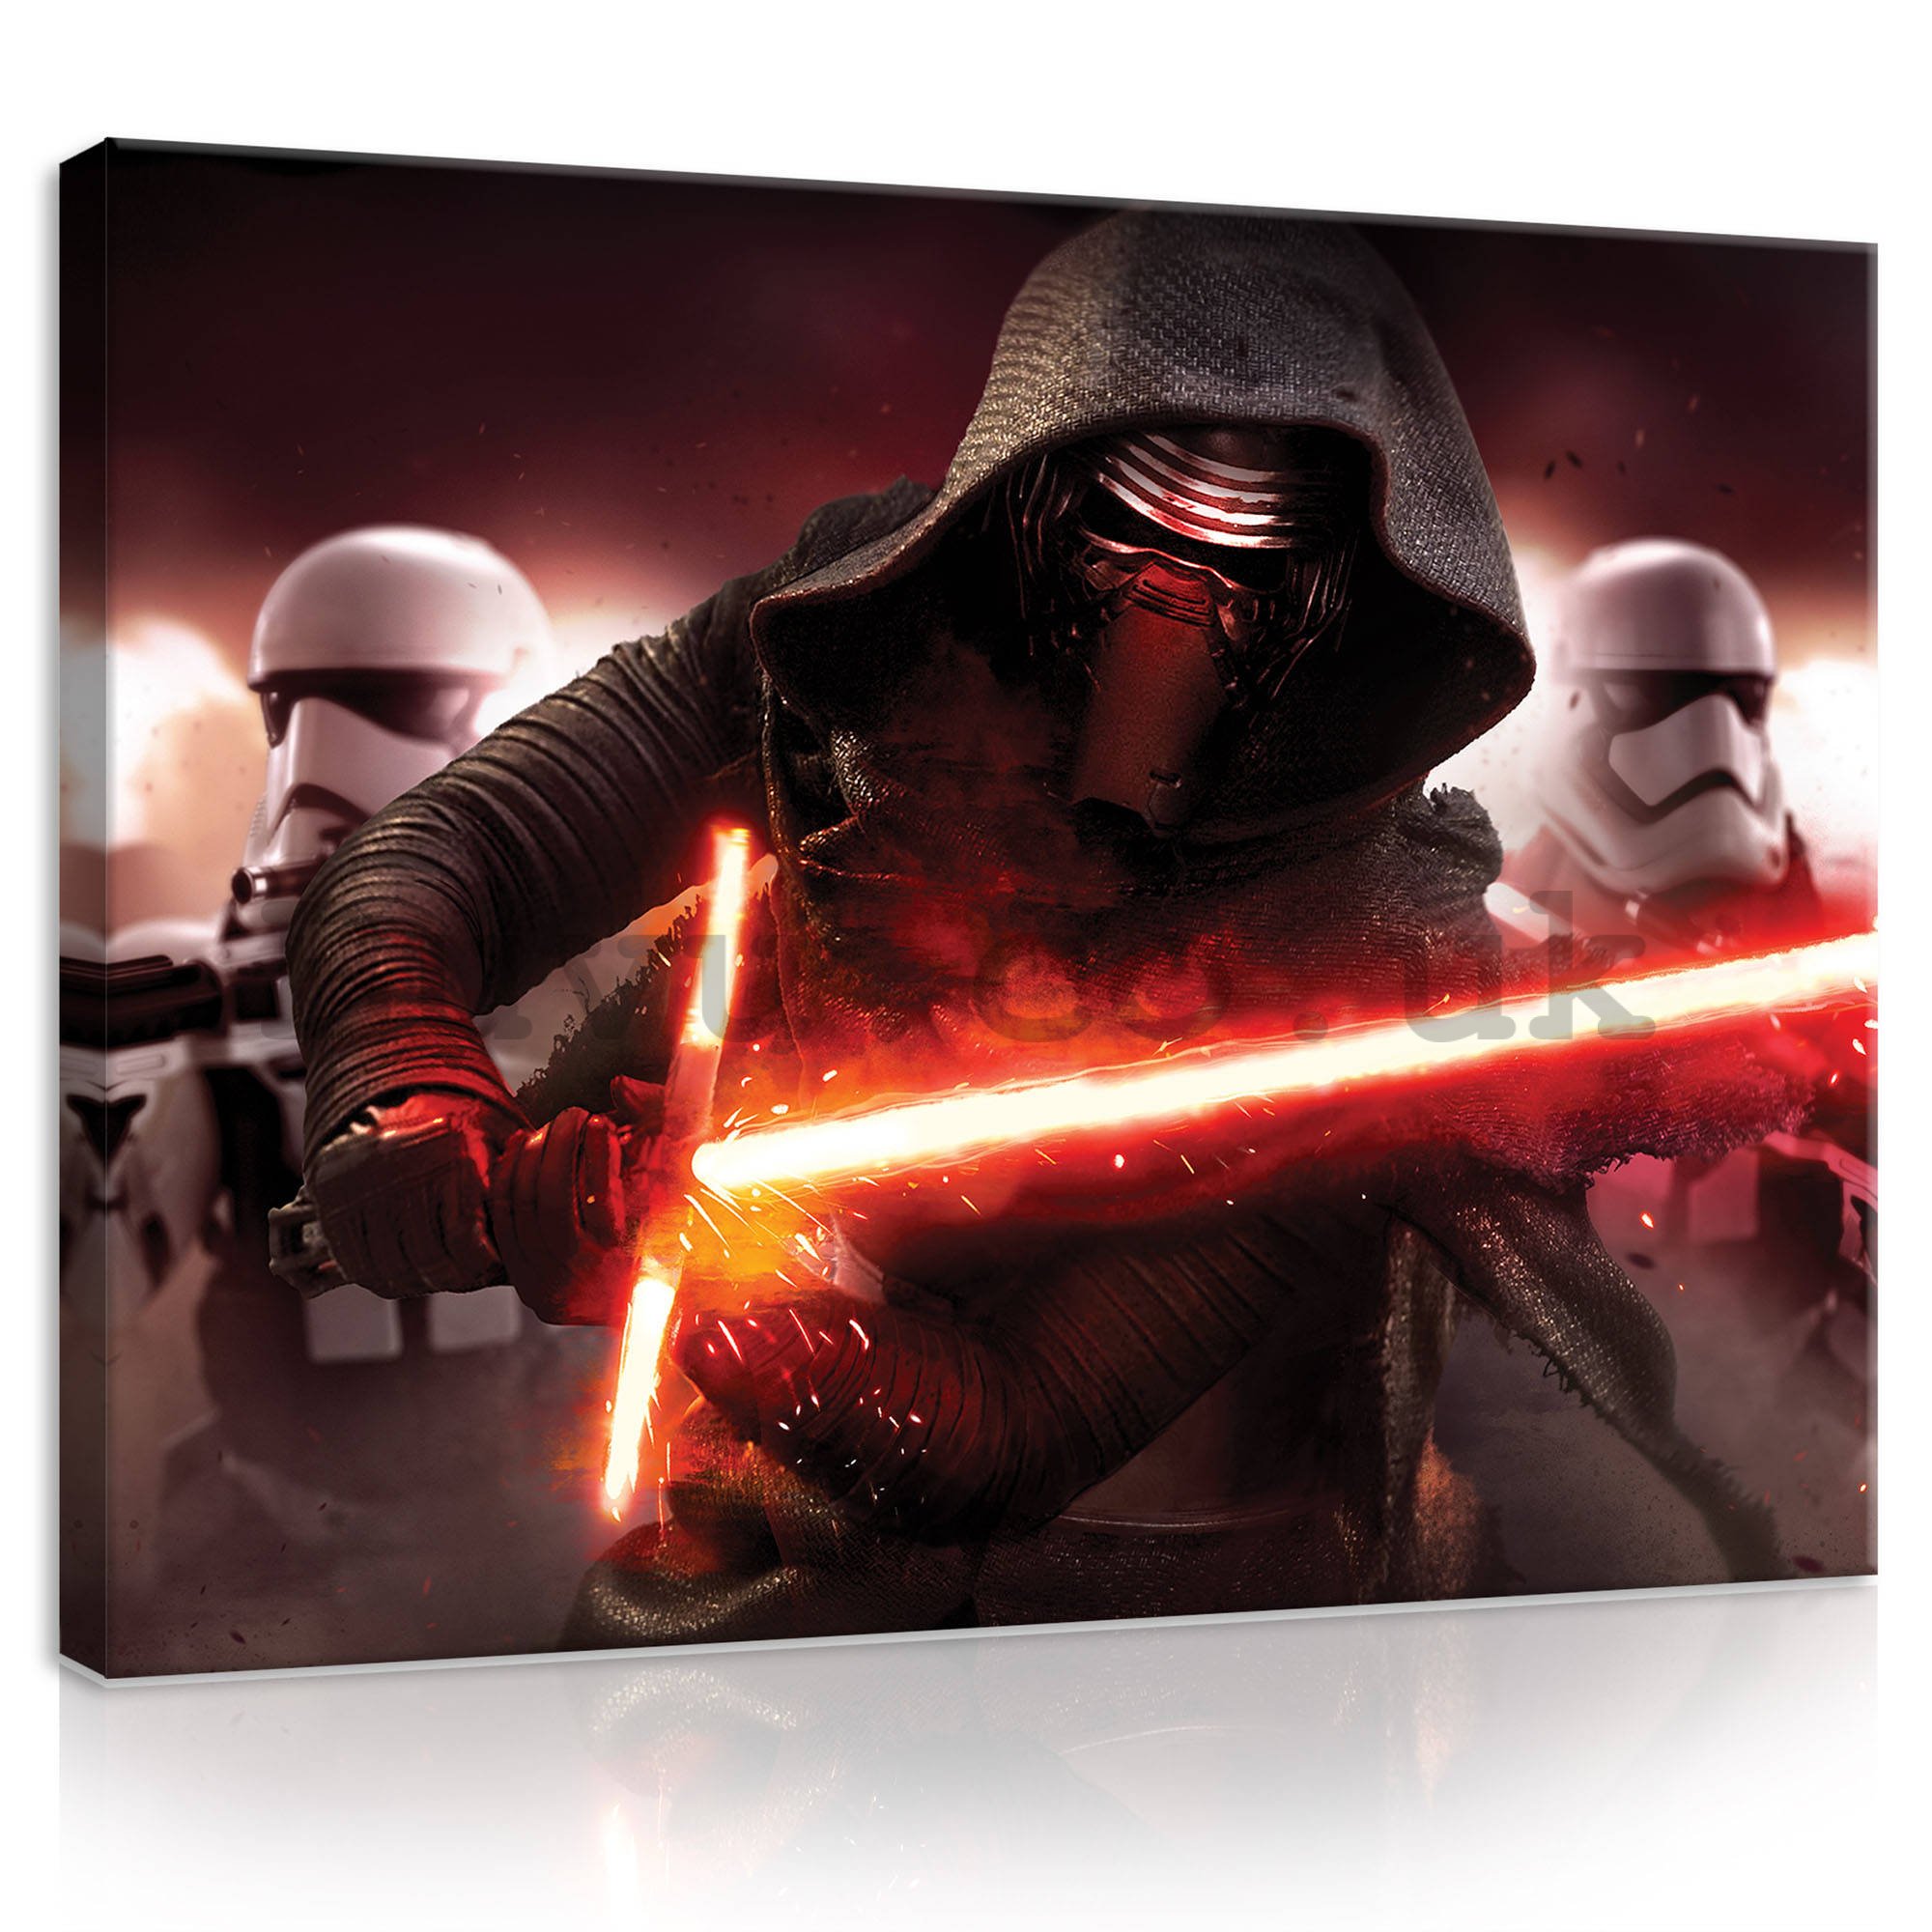 Painting on canvas: Star Wars Kylo Ren's Lightsaber - 80x60 cm